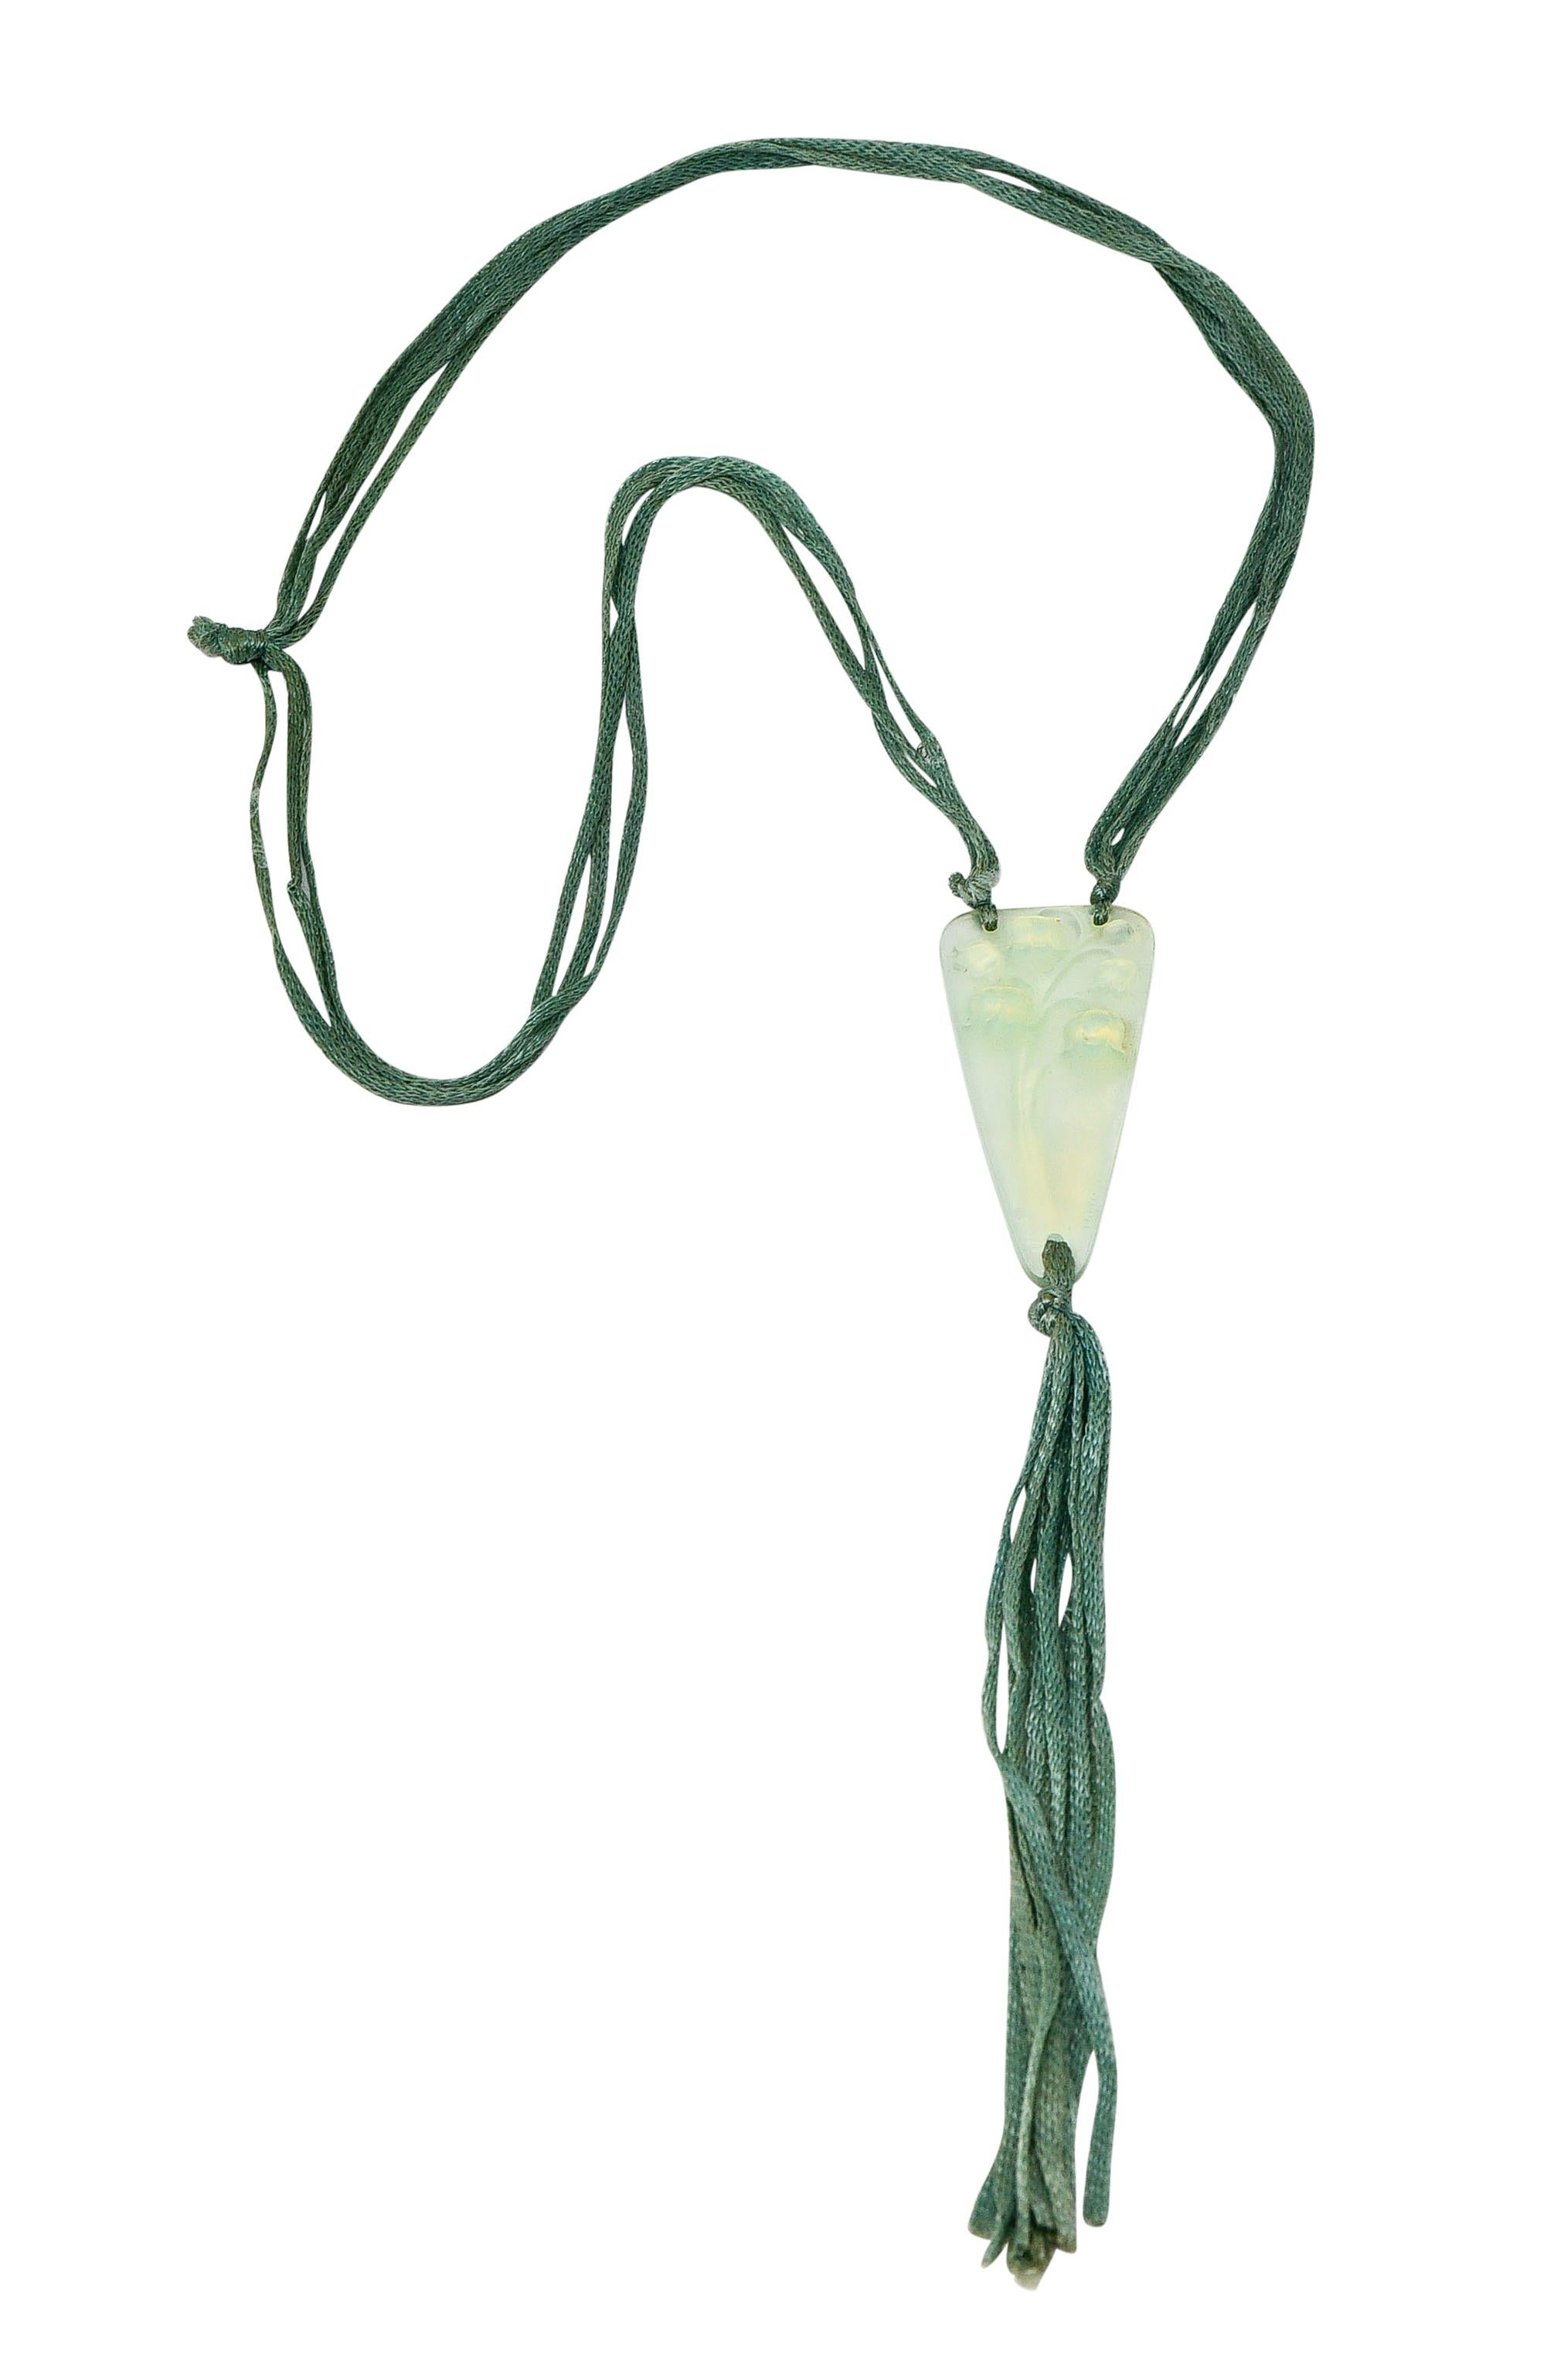 Multi-strand style necklace with four cords of braided silk; light bluish-green in color with wear consistent with age

Centering a triangular frosted glass pendant, highly rendered to depict lily of the valley florals; symbolic of